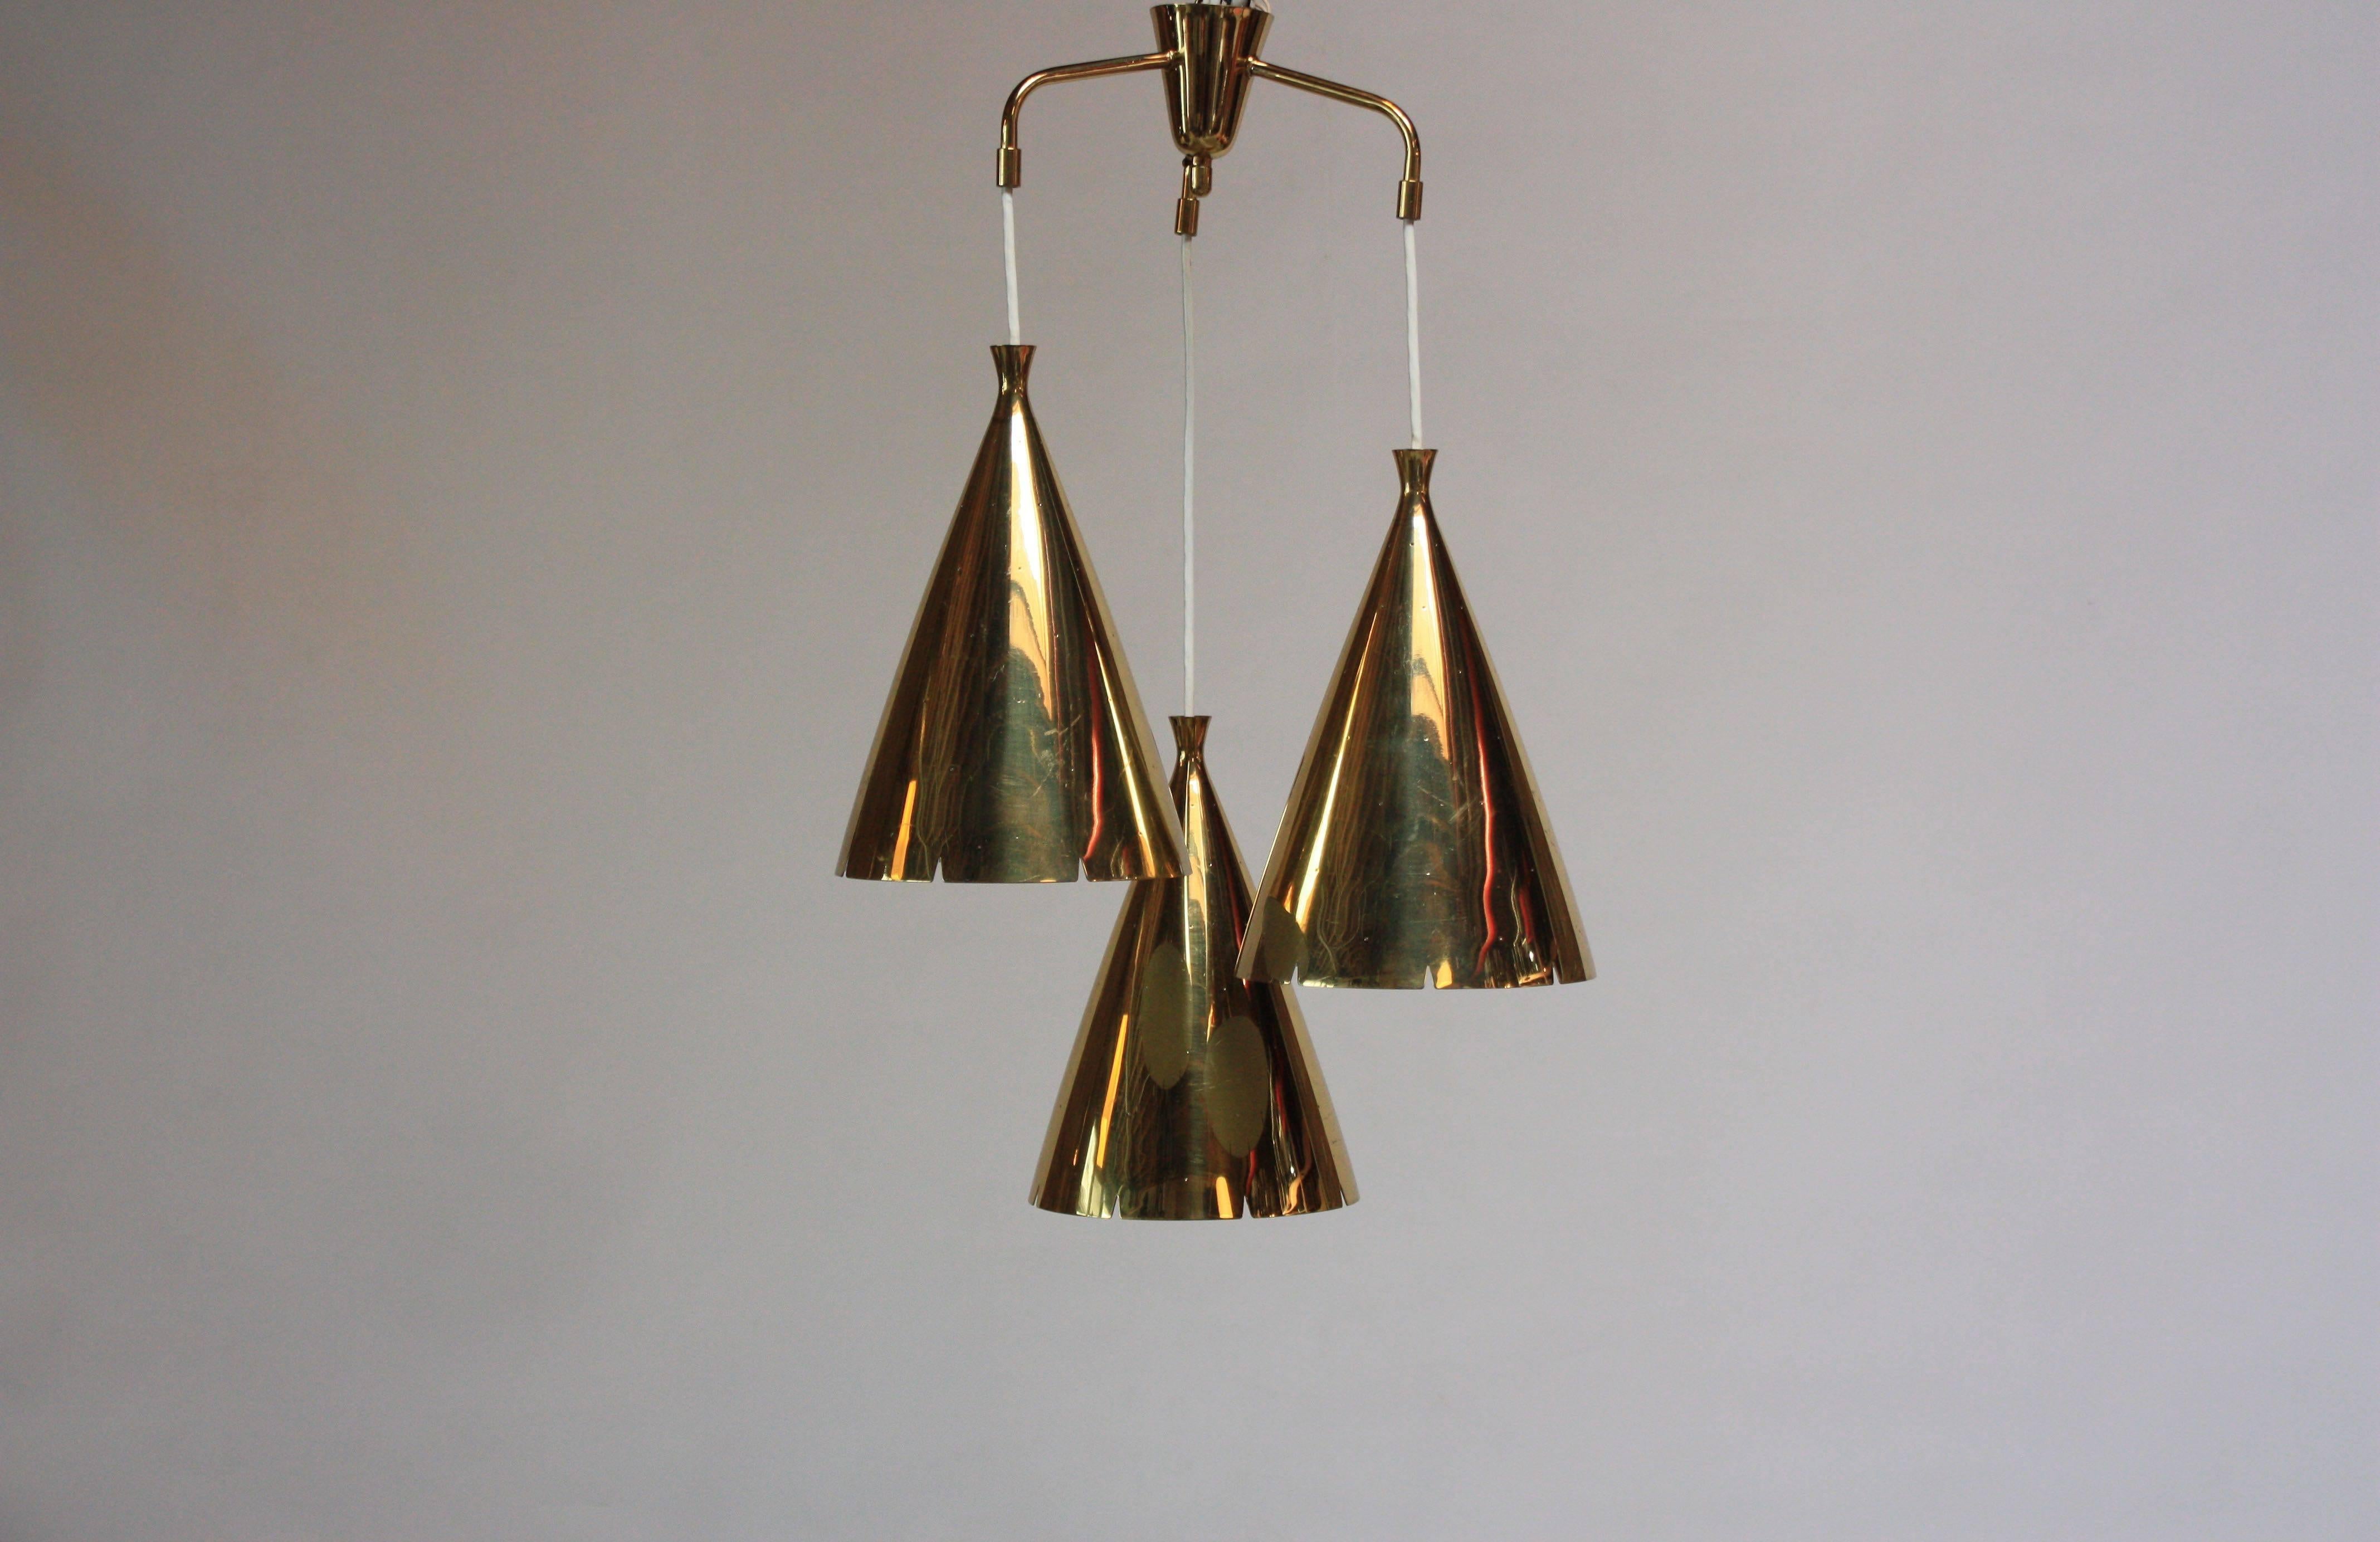 Impressive three-fixture solid brass chandelier, circa 1950s. Composed of three large brass pendants with perforations (each fixture alone measures 12.25